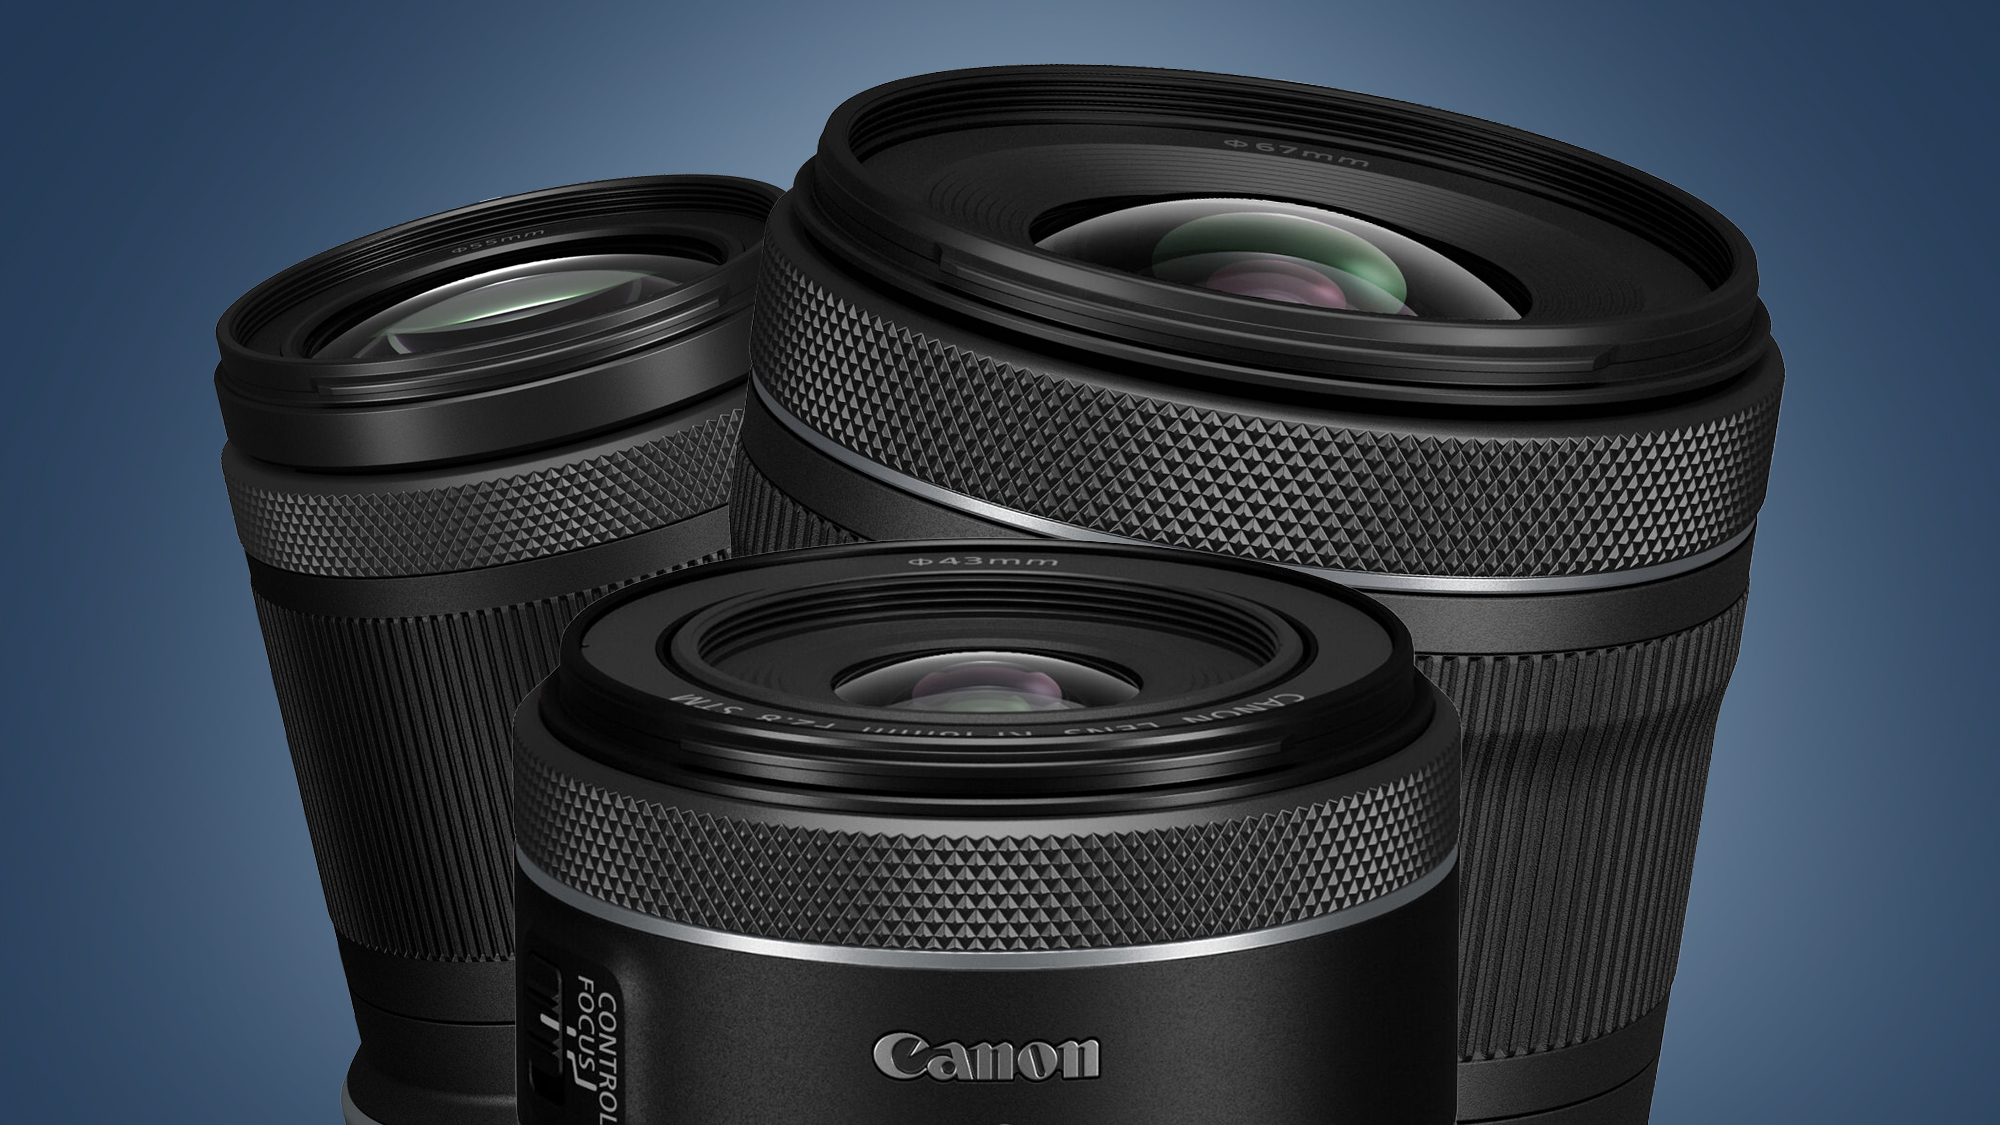 Three Canon lenses on a blue background